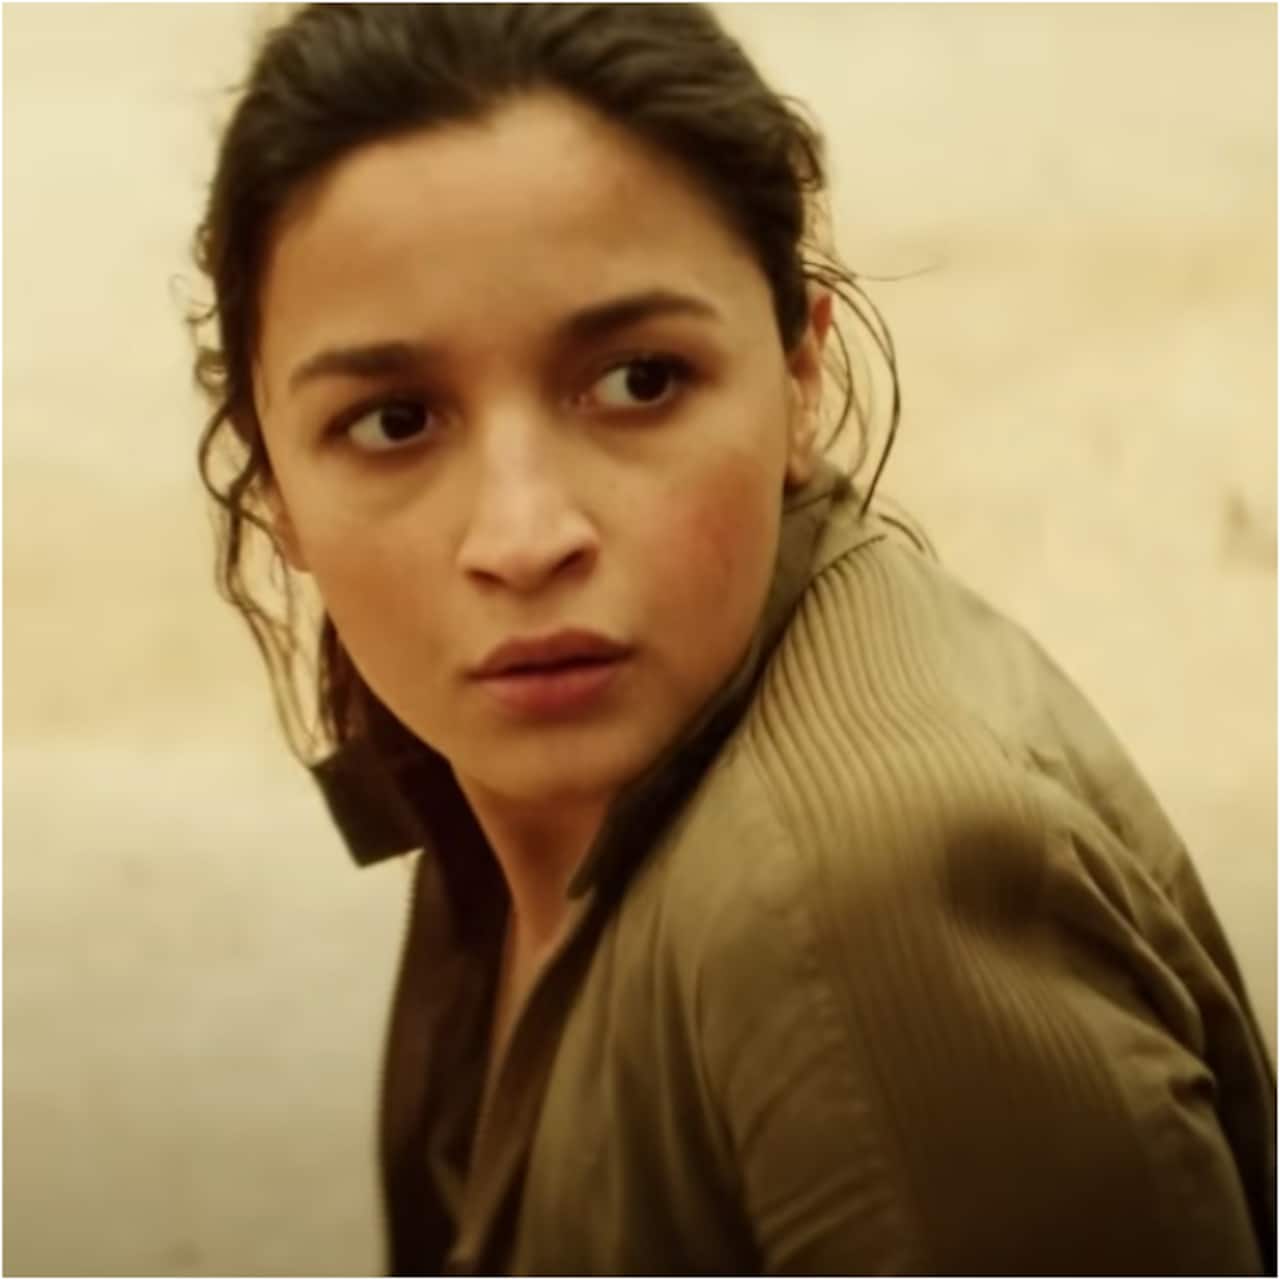 Heart Of Stone: Alia Bhatt shares the first look of her Hollywood debut and it's action packed; her character's name grabs everyone's attention